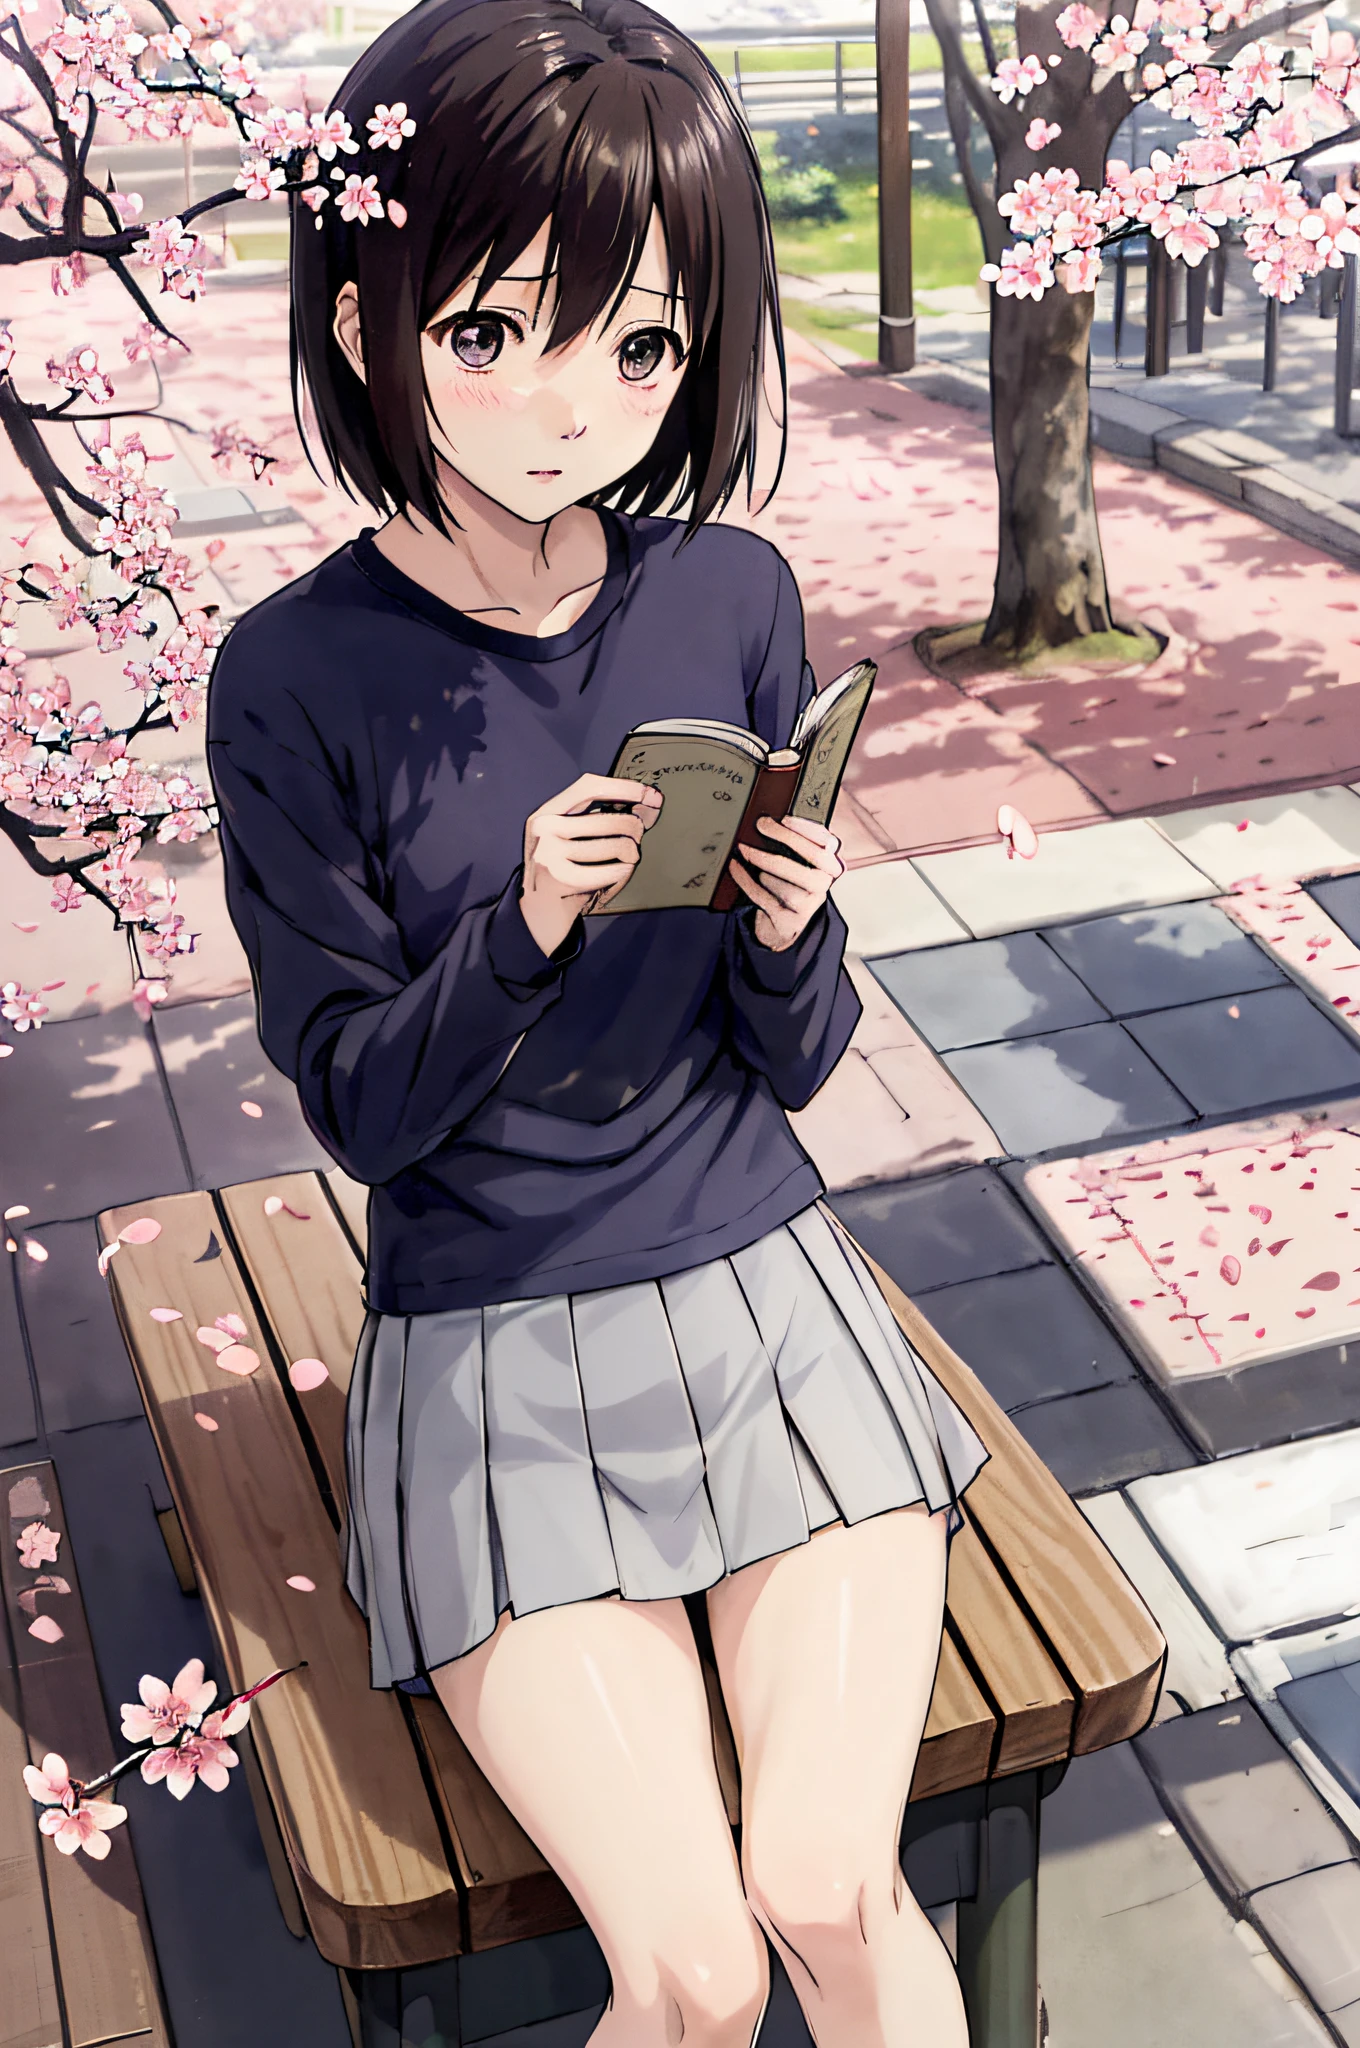 nakahara_misaki、two-tone shirt、a miniskirt、plein air、a park、Cherry blossom petals fluttering、、Blue theme、mournful、Eyes of the Sky、looking-down、The tree、Benches、sitted、Panties are visible、Reading a book、white panty